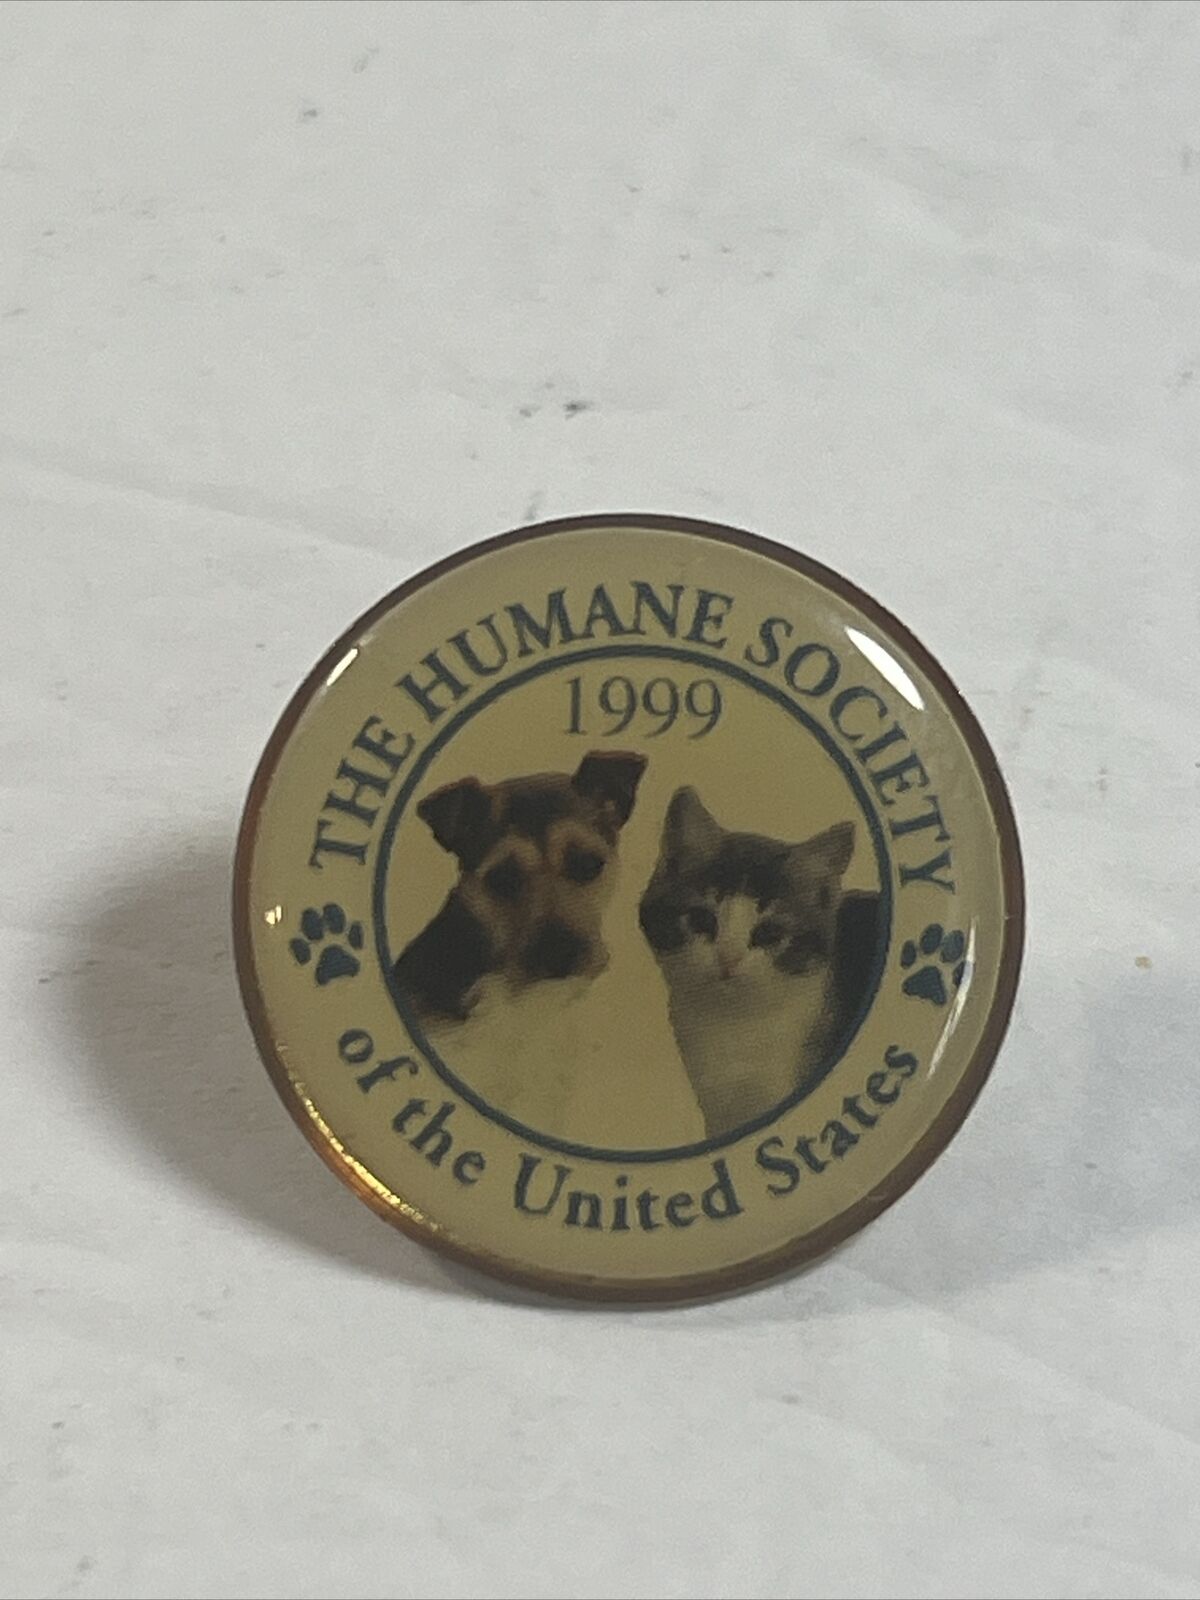 The Humane Society of the United States 1999 Gold Tone Lapel Tie Hat Pin